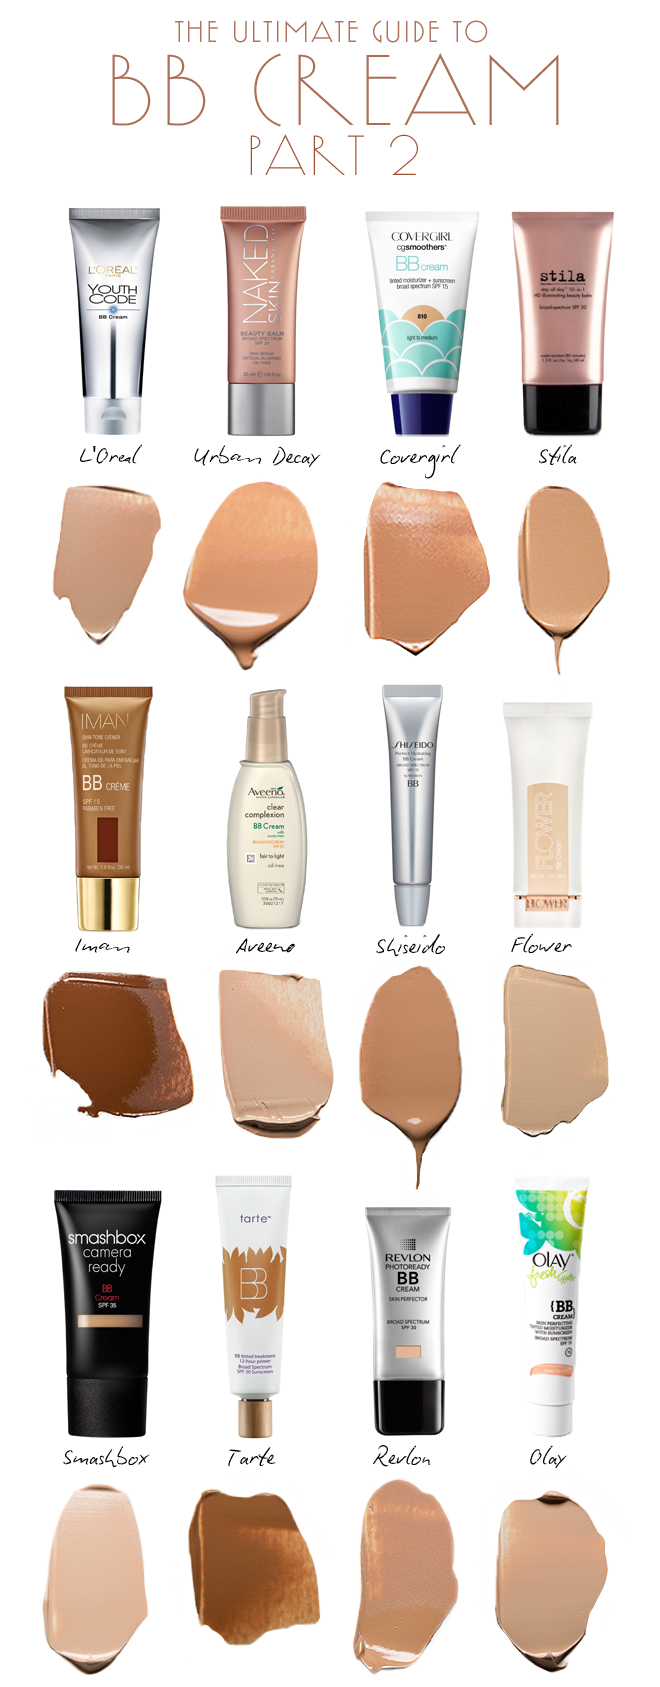 The Ultimate Guide to BB Creams: Part 2